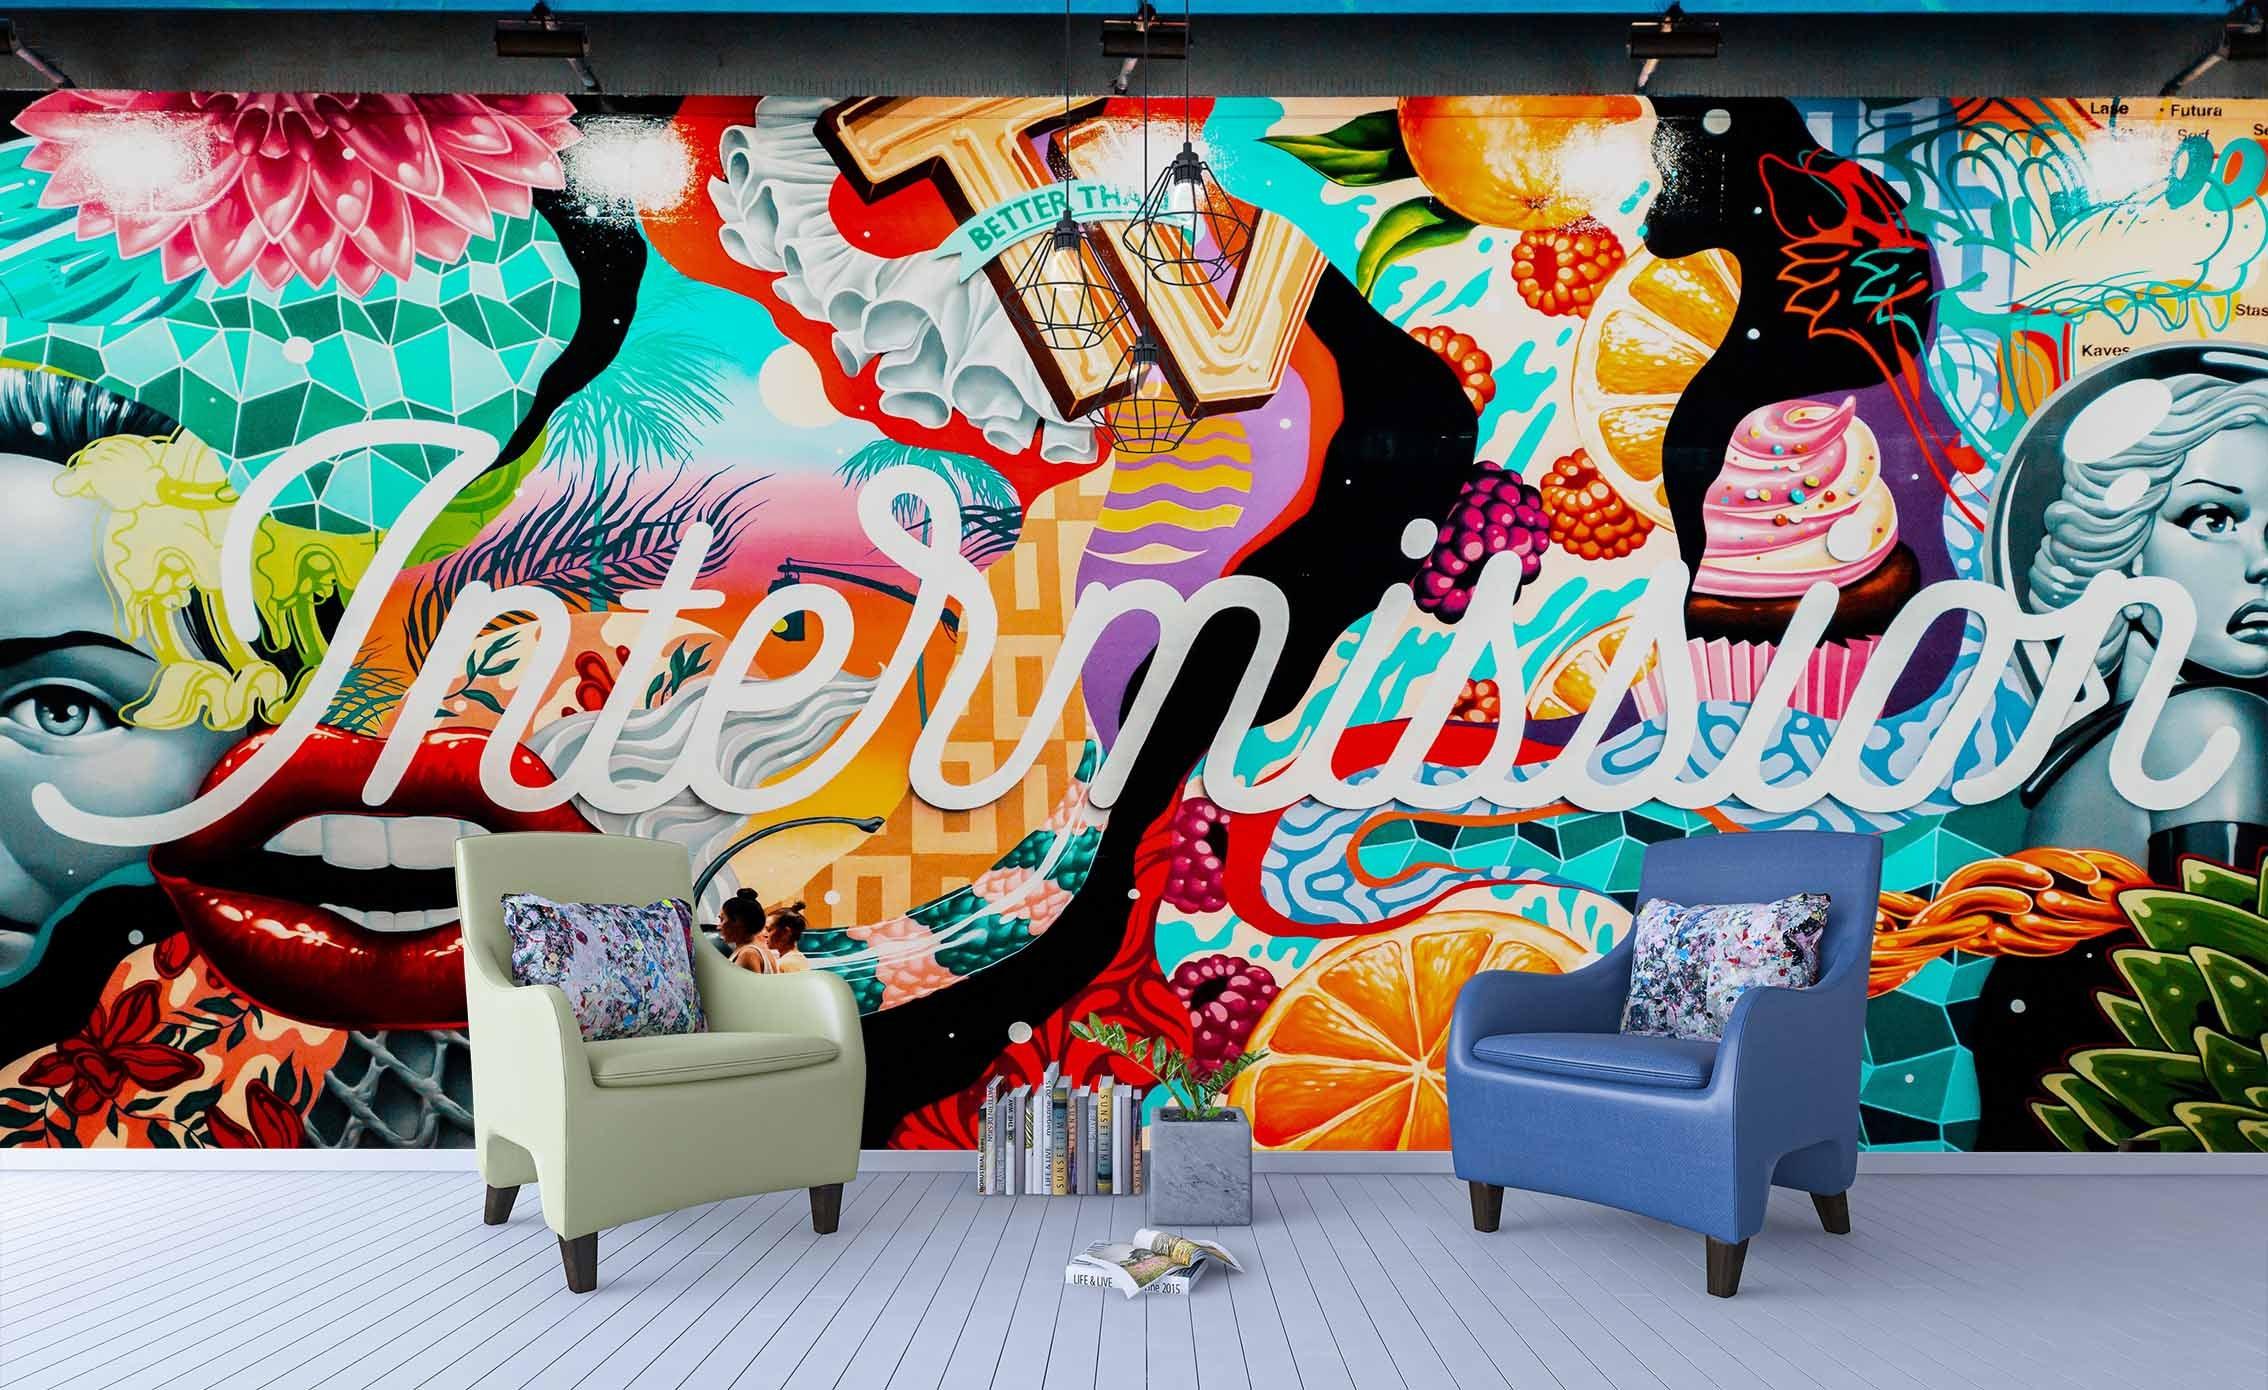 3D Bright Abstract Graffiti White Letter Wall Mural Wallpaper ZY D62- Jess Art Decoration